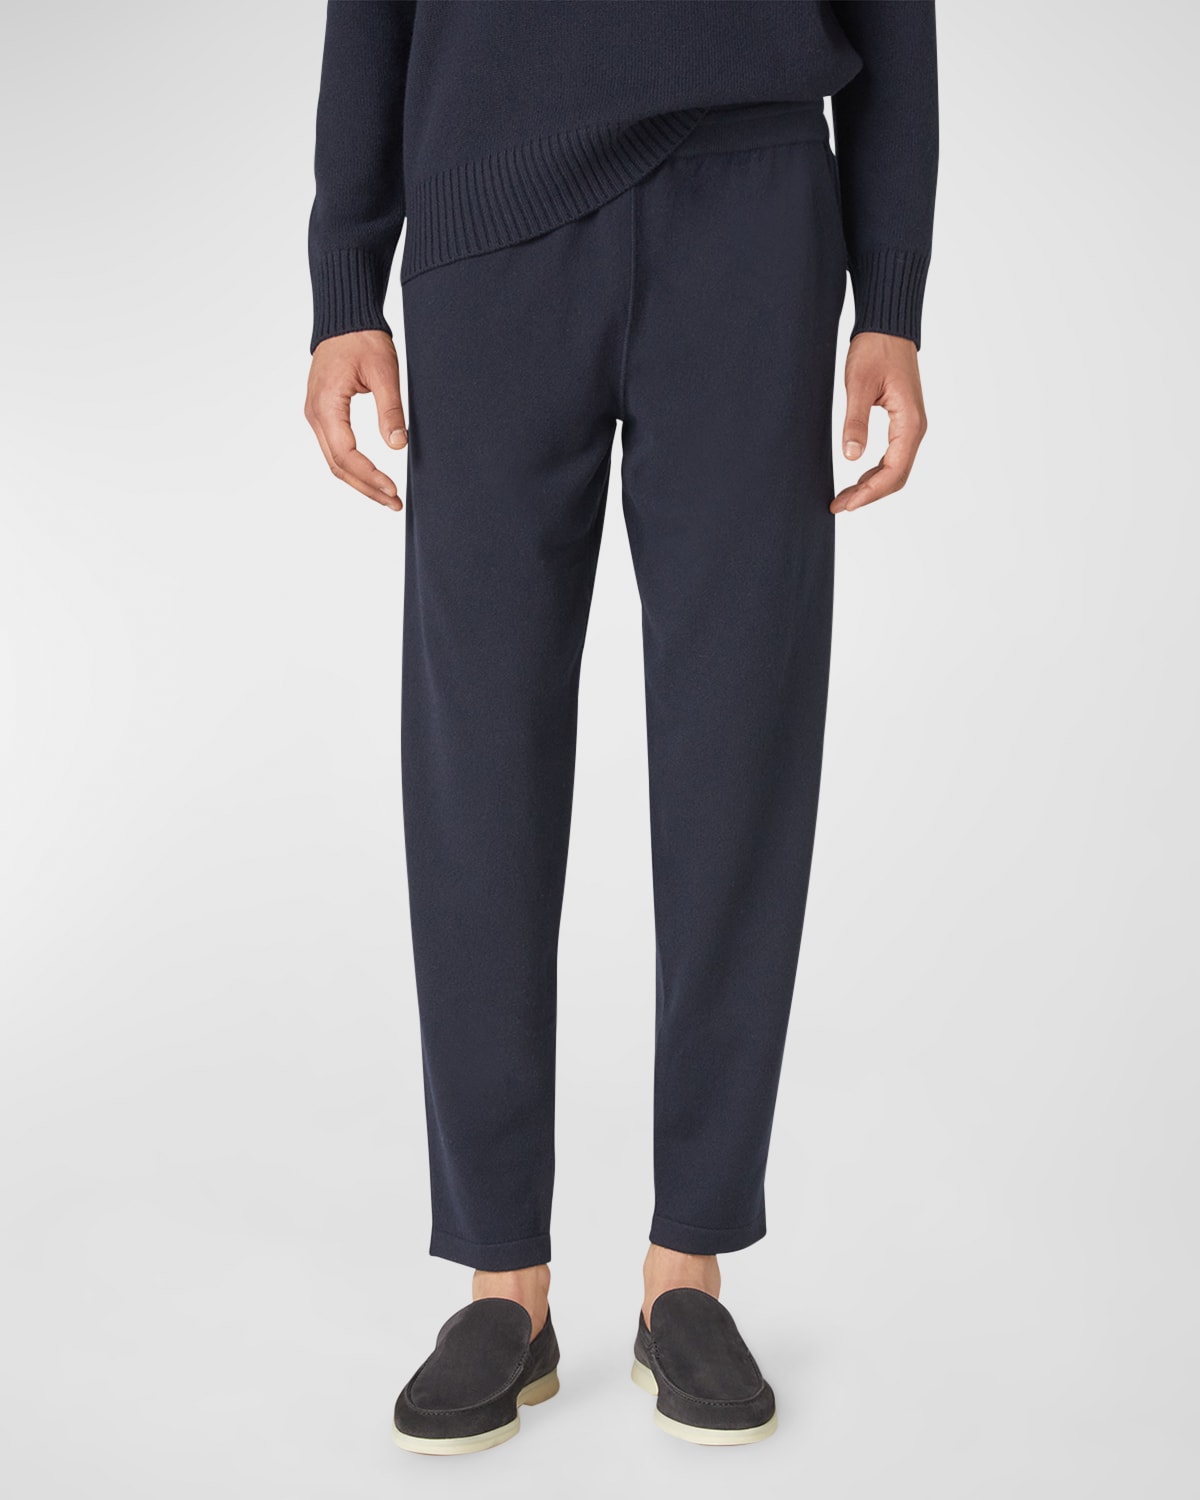 Loro Piana Men's Baby Cashmere Knit Drawsting Trousers In Blue Navy